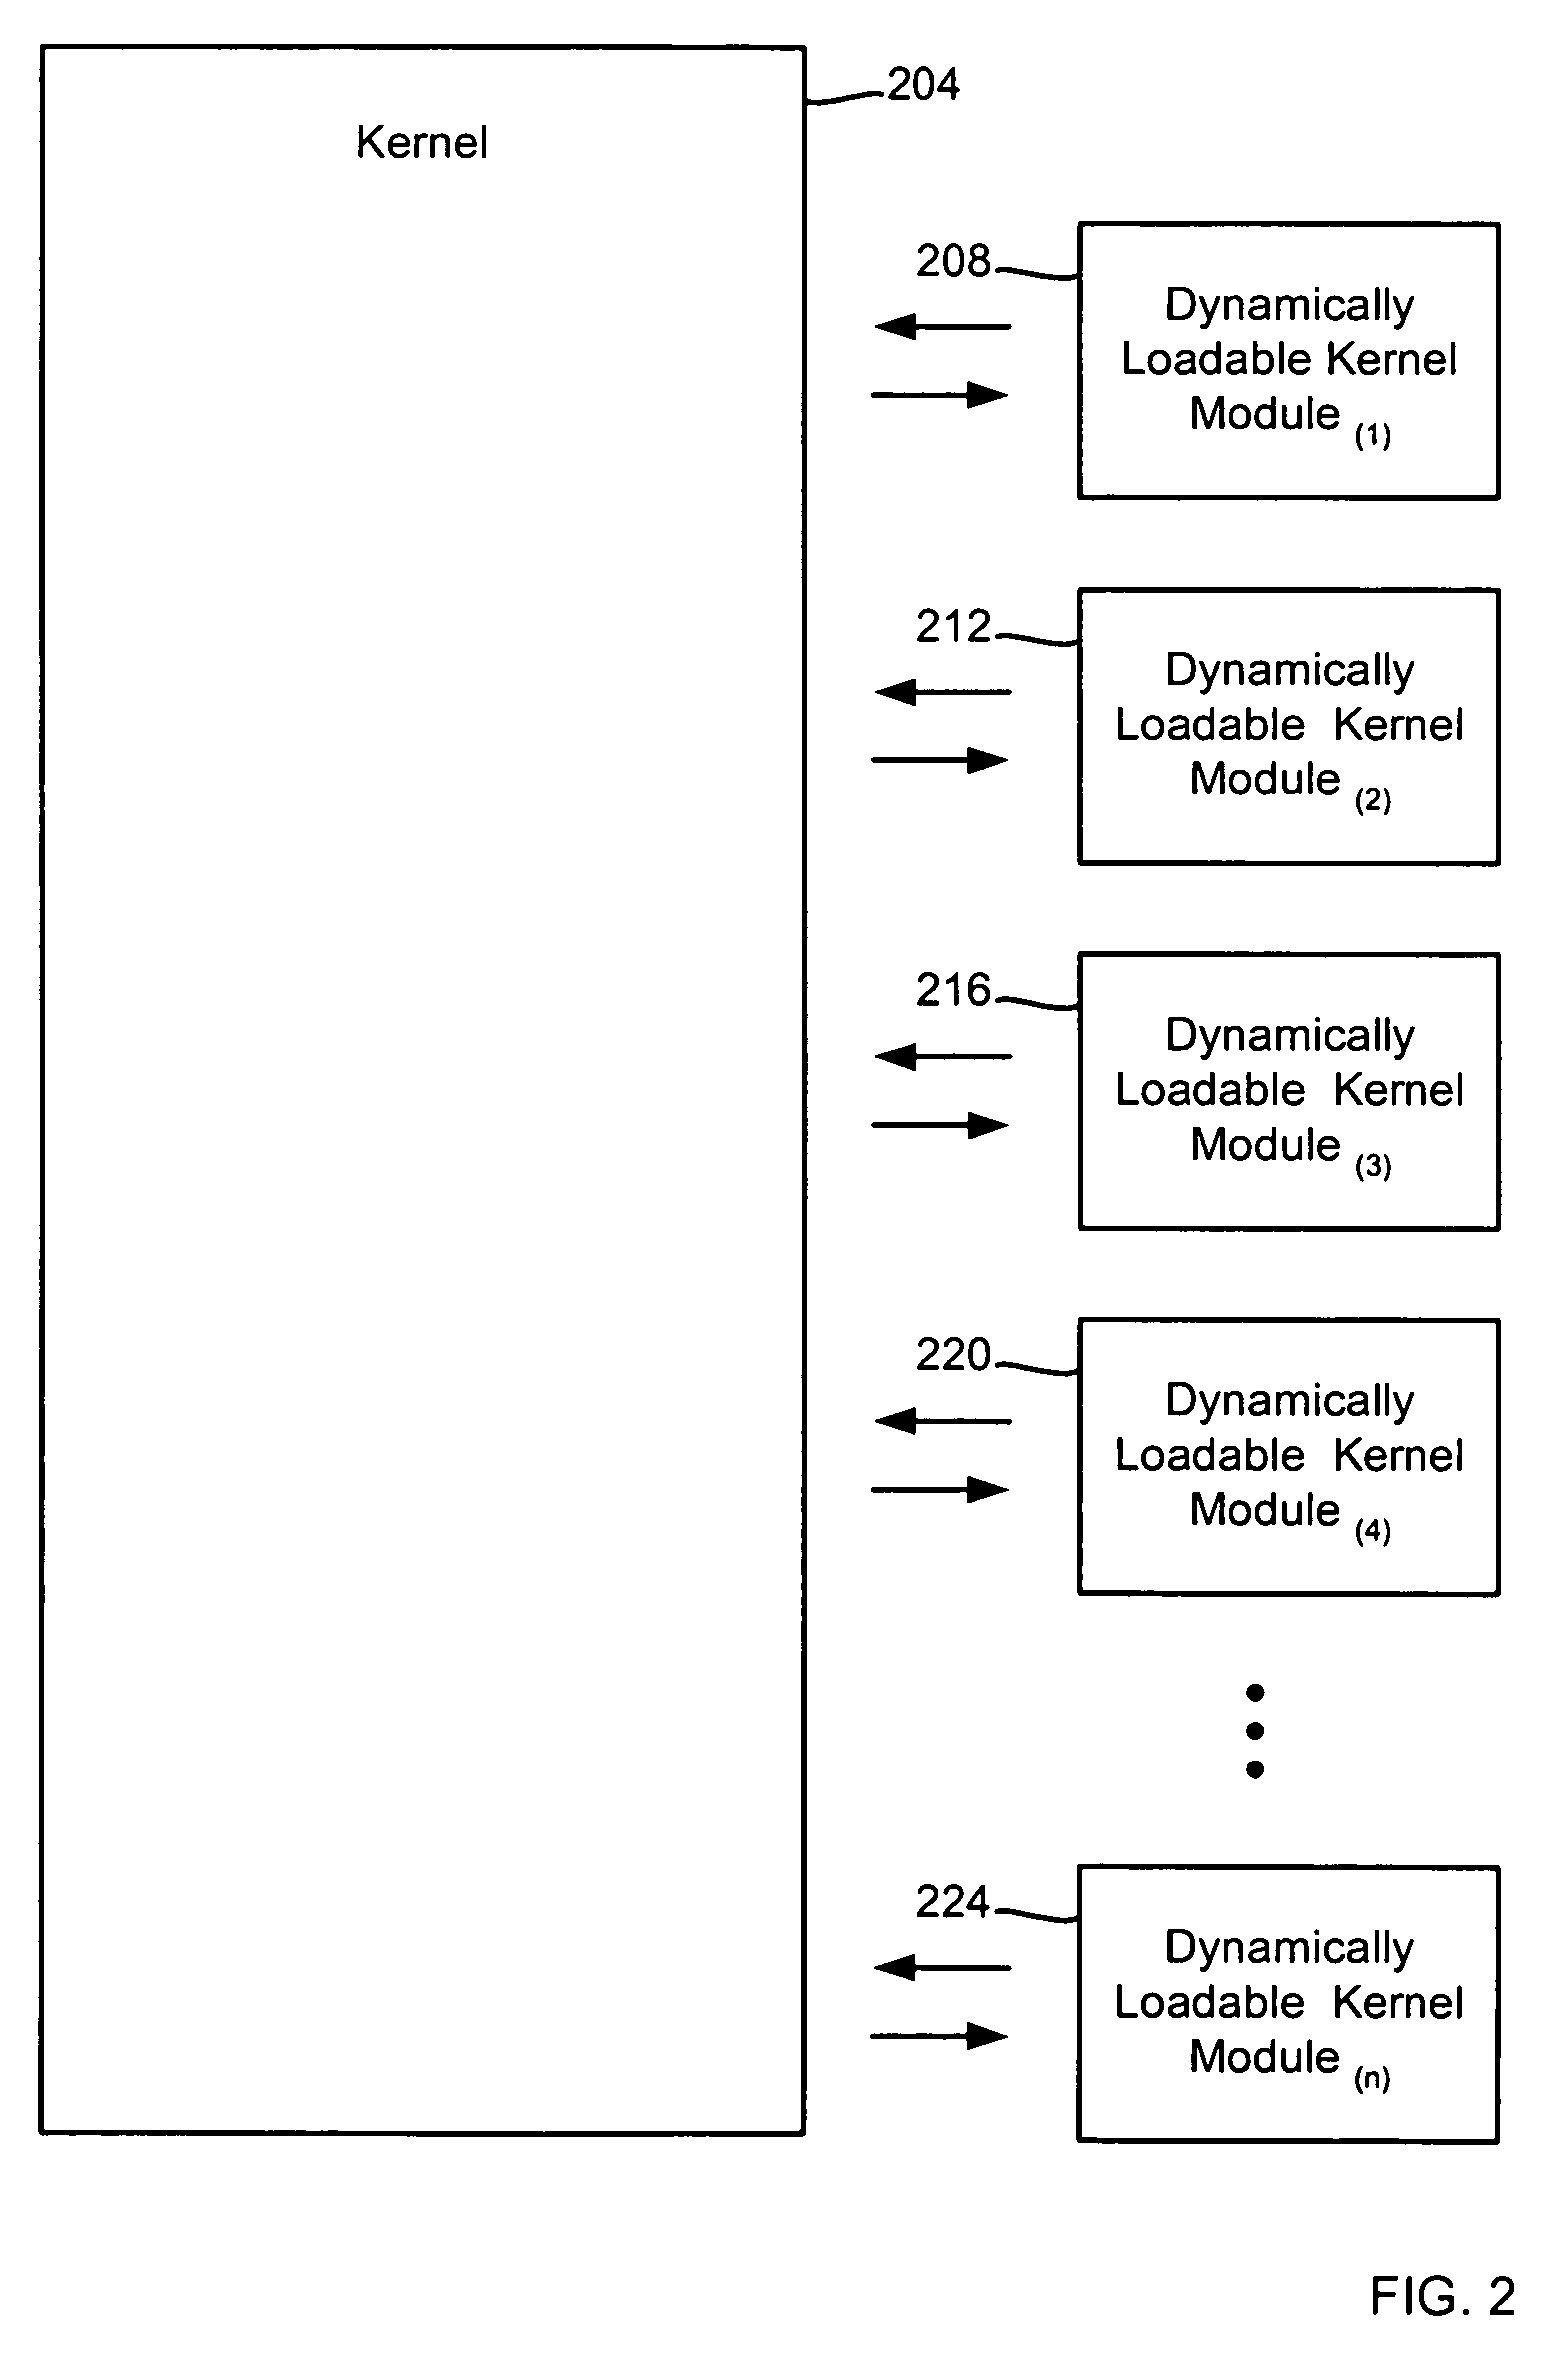 Methods and tools for executing and tracing user-specified kernel instructions